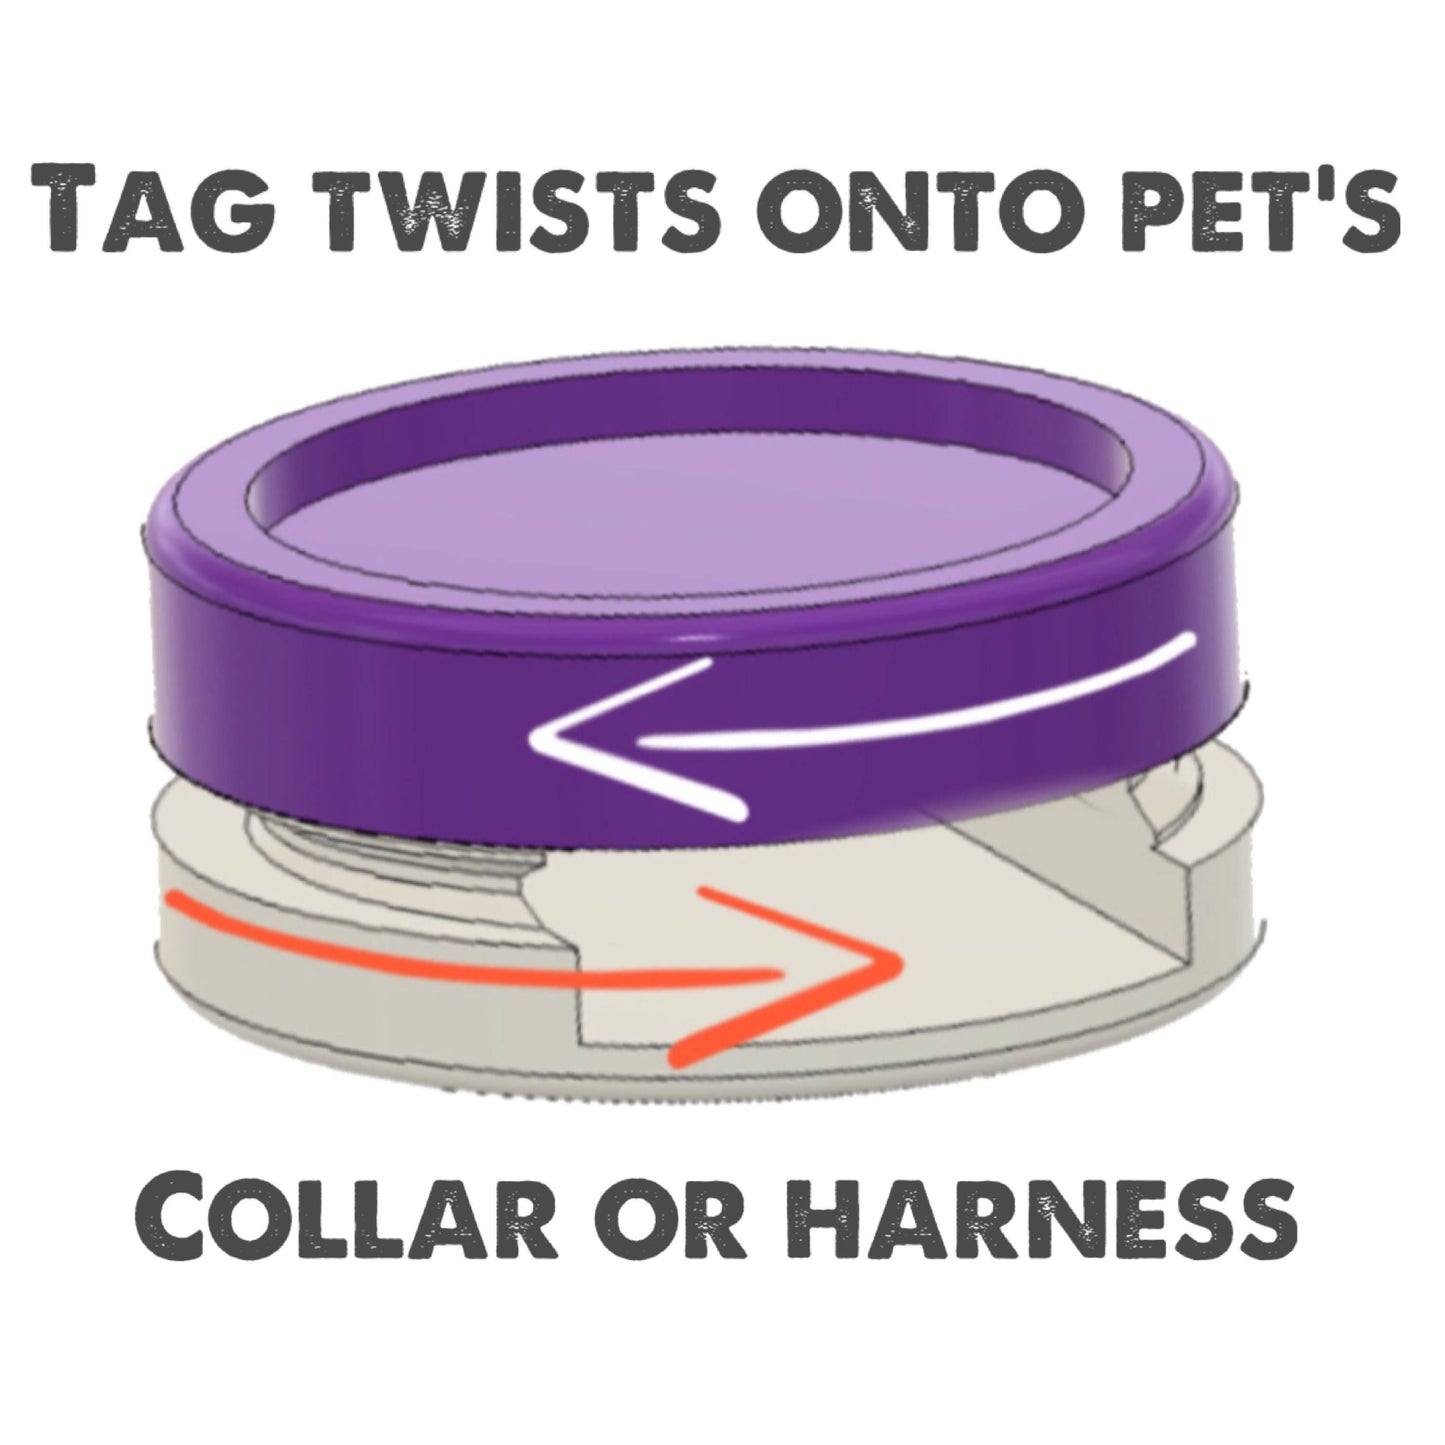 2 Tone Color TWIST TAG- rounded text- Silent, Eco-Friendly, Ringless & Silent ID Tag for Cats and Dogs Cute Dog Tag